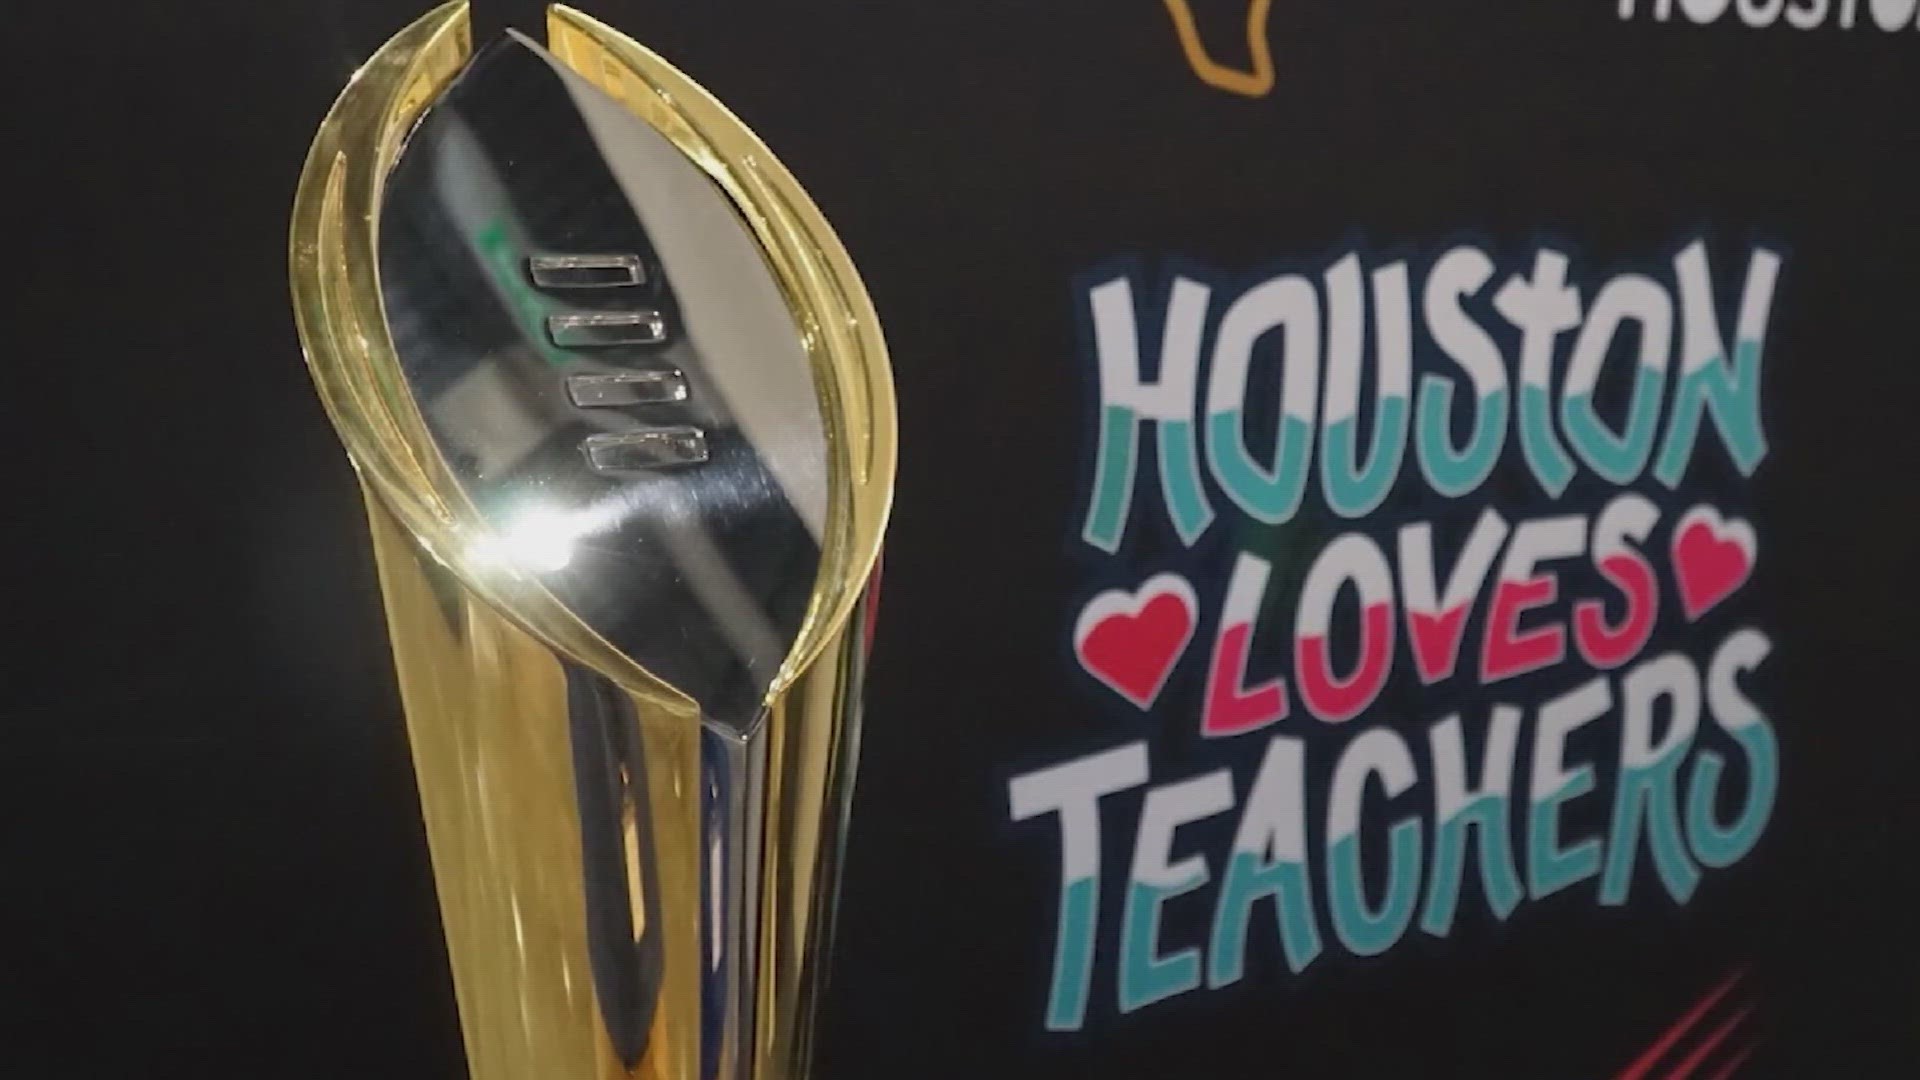 Ahead of Monday’s CFP National Championship game at NRG Stadium, organizers said they are helping thousands of teachers across the area.